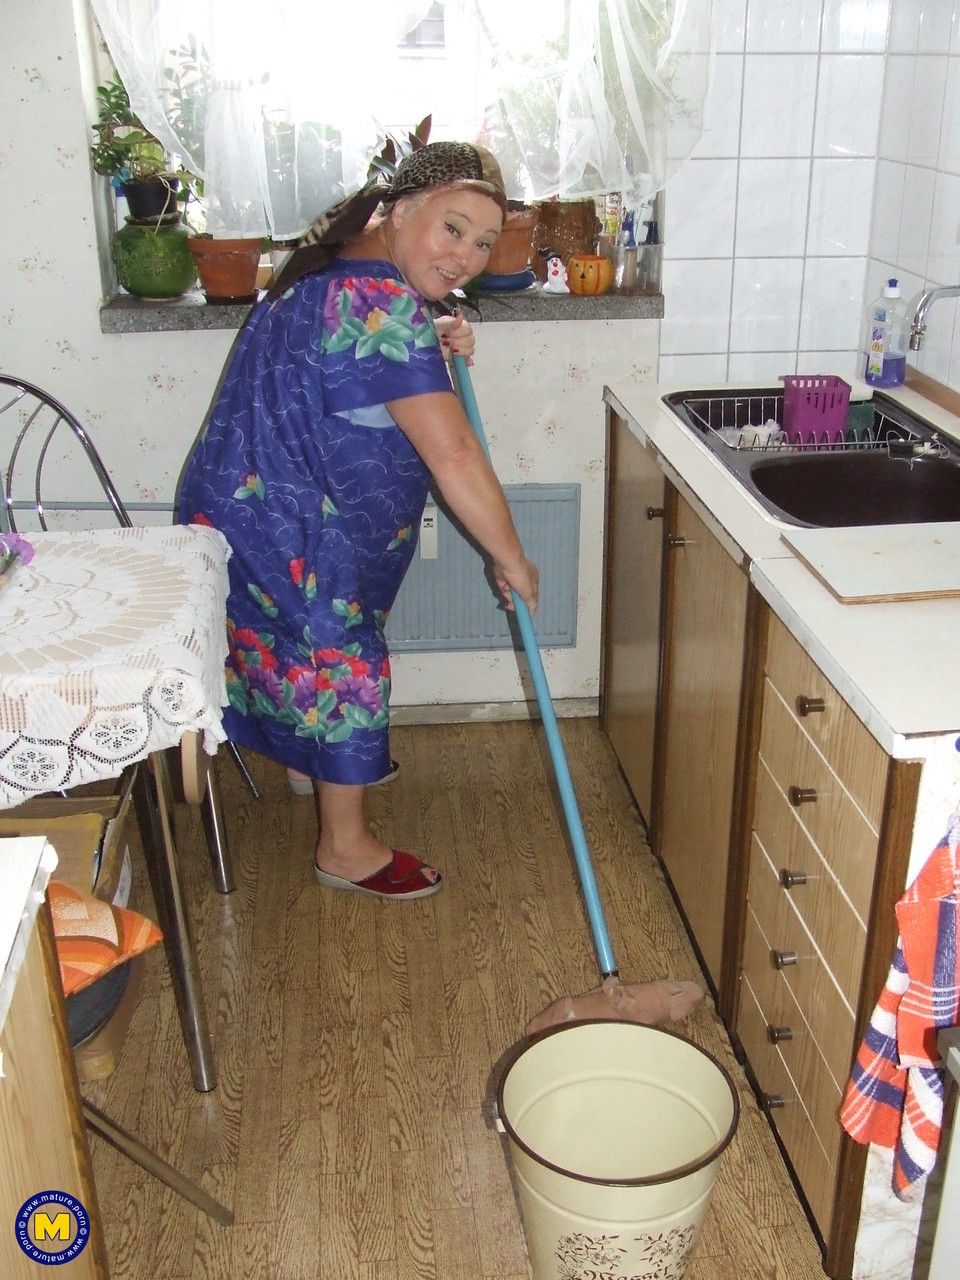 Fat granny Regina strips her clothes and poses while cleaning the kitchen 色情照片 #425872085 | Mature NL Pics, Regina, Mature, 手机色情